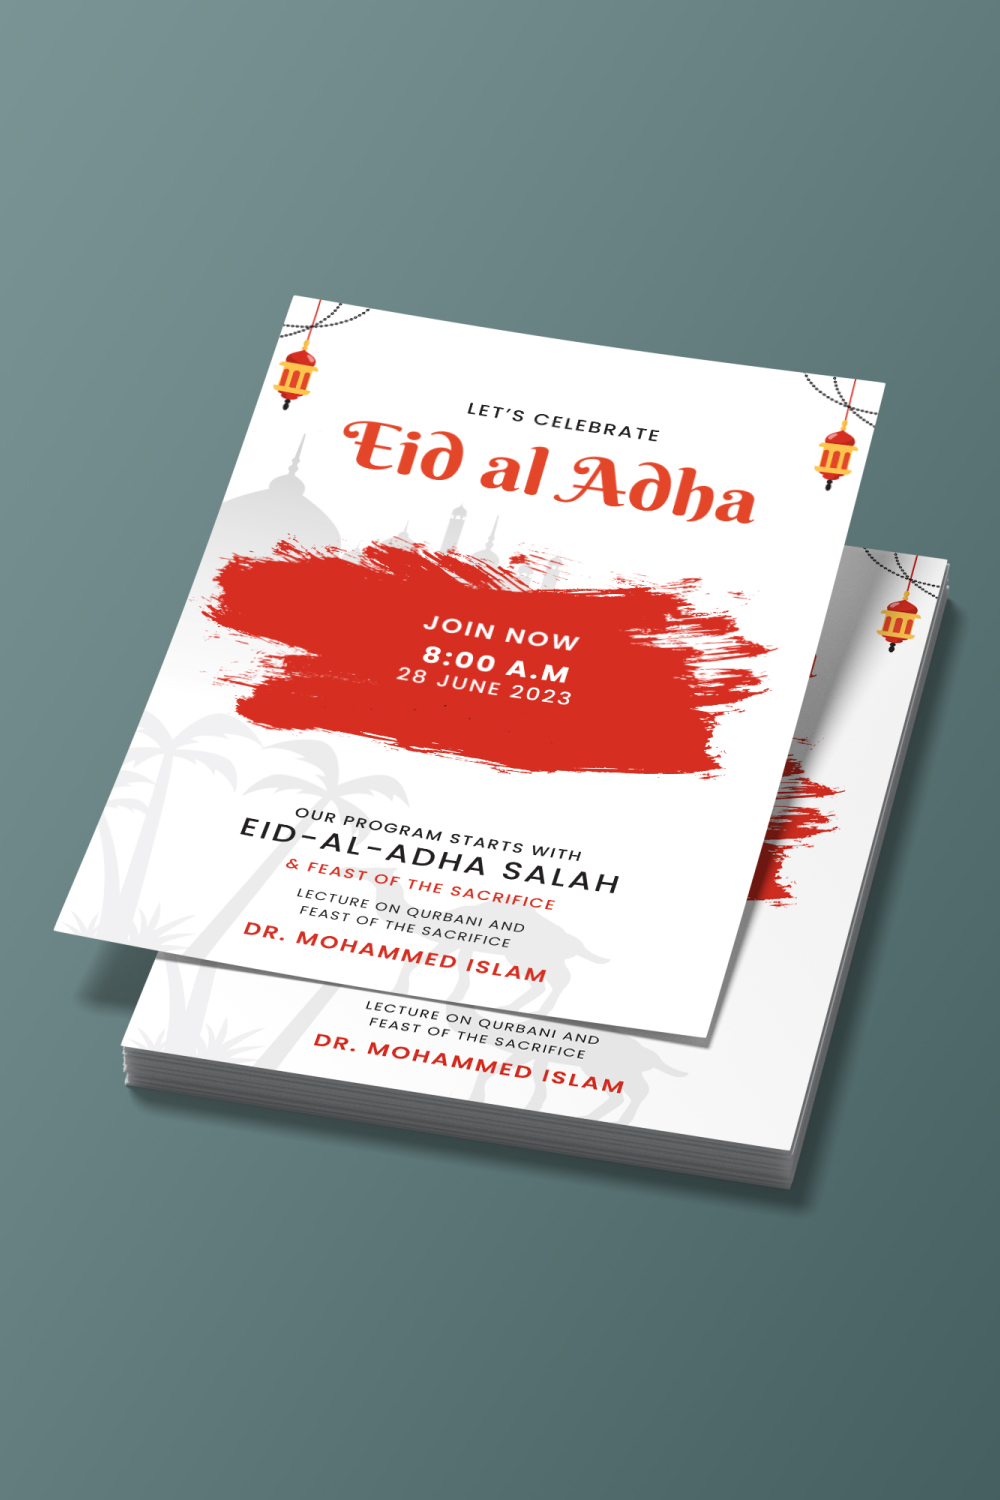 eid ul adha flyer poster, Free vector pinterest preview image.